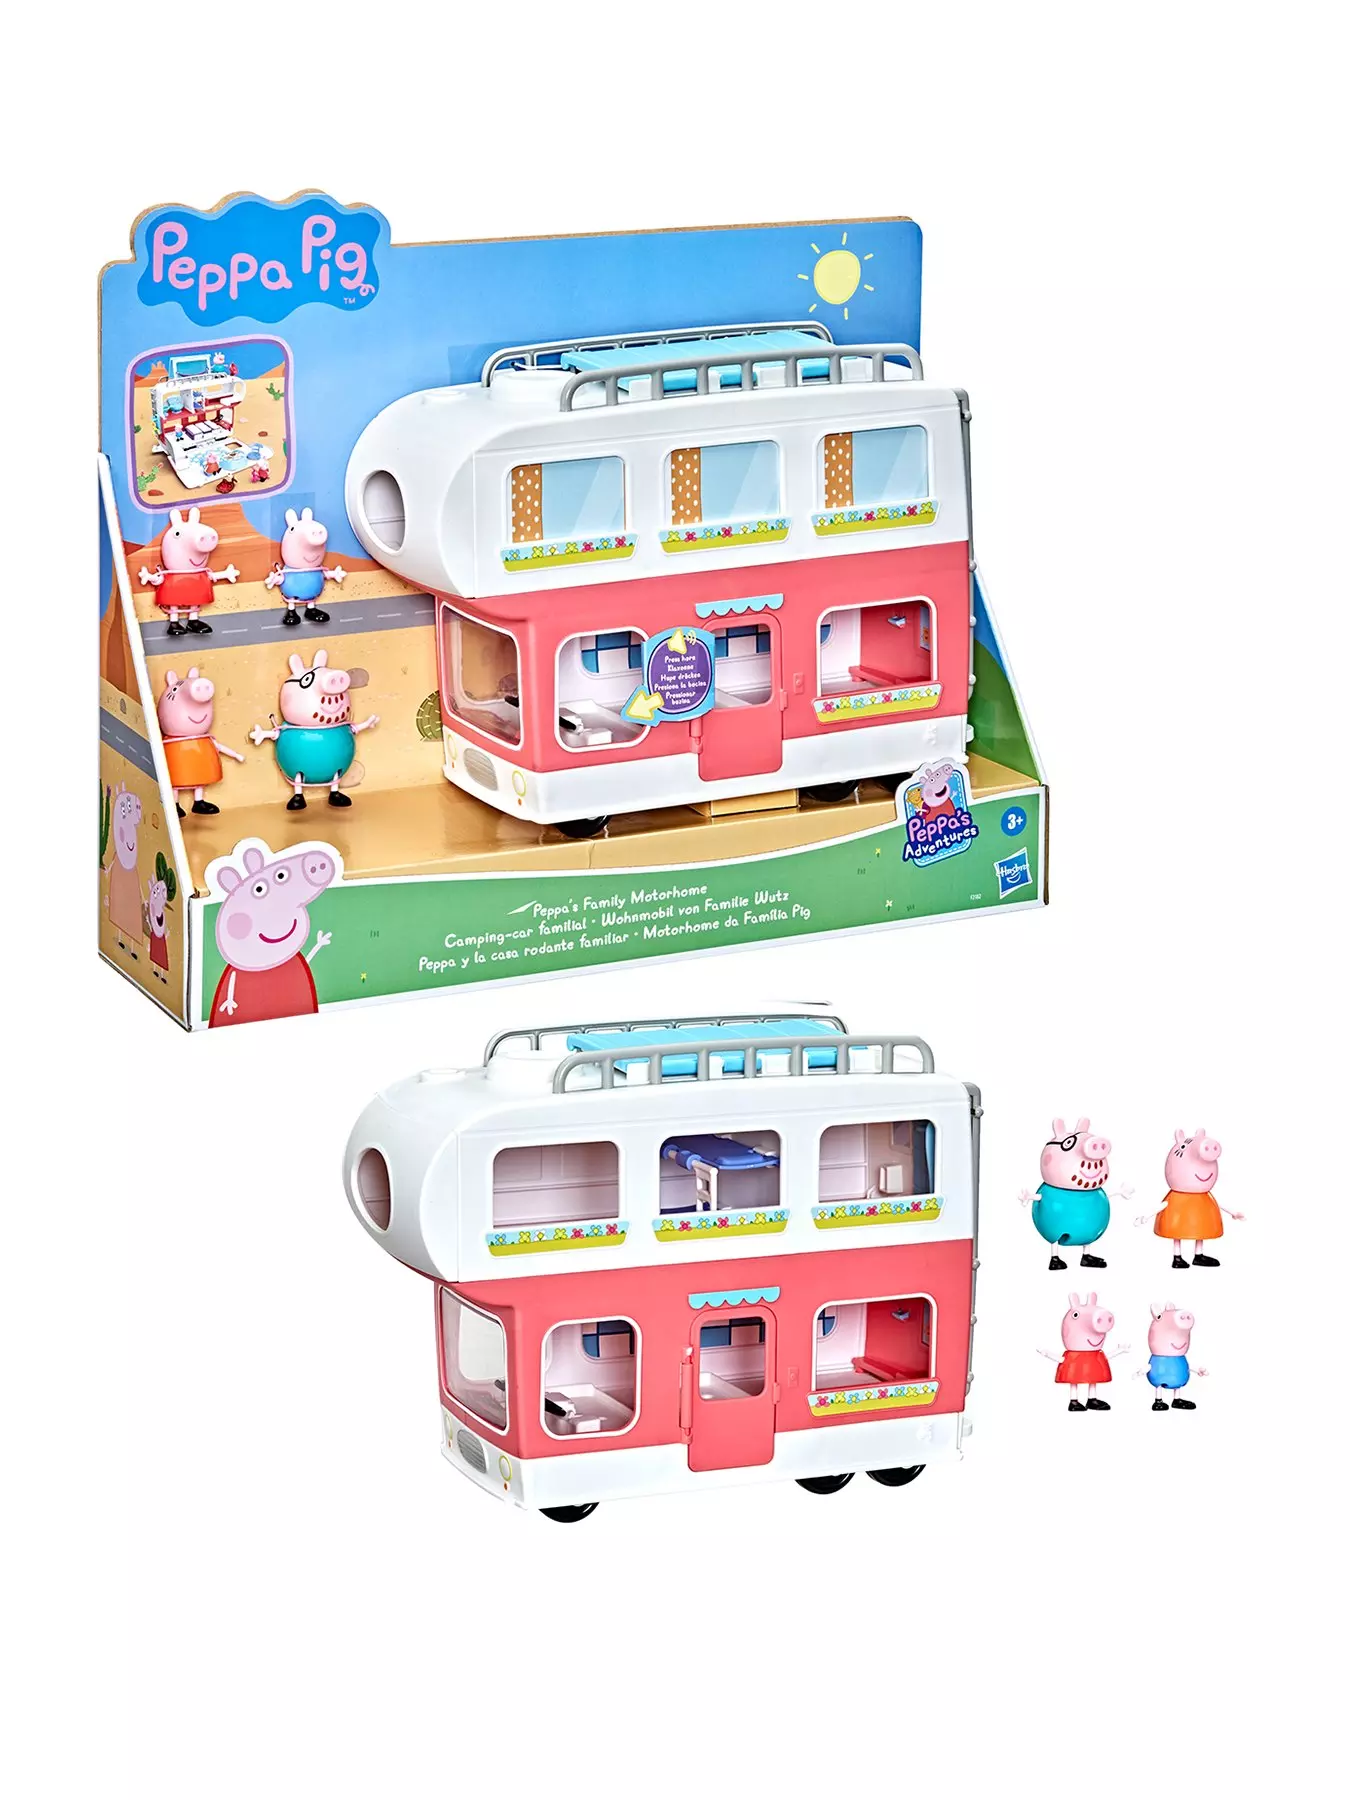 Peppa Pig Peppa's Adventures Peppa's Family Ice Cream Fun Figure 4-Pack  Toy, 4 Family Figures with Frozen Treats, Ages 3 and Up